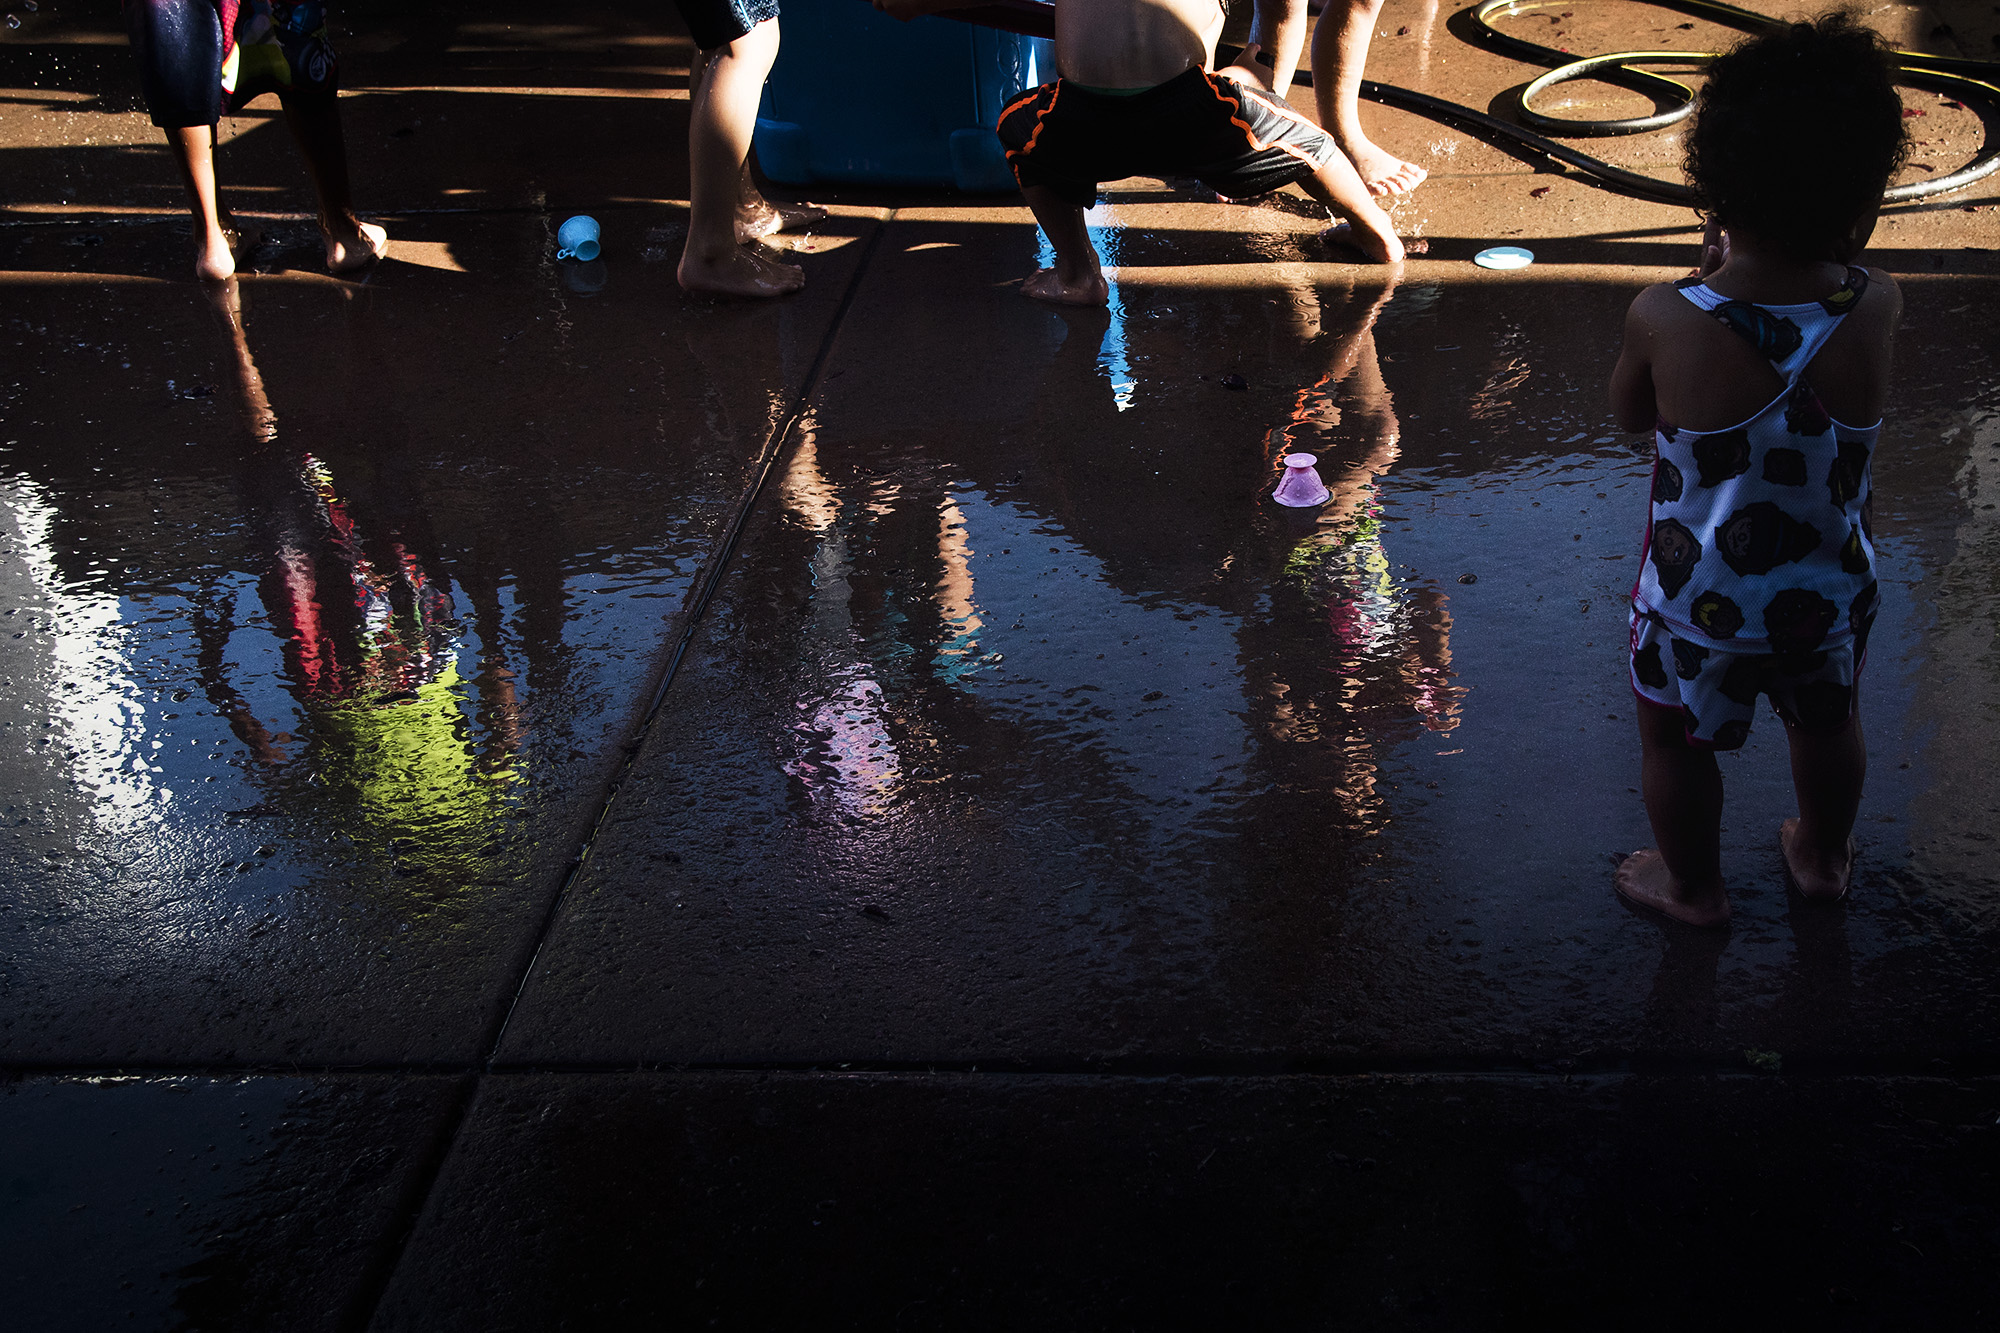 reflection of kids on wet pavement - documentary family photography